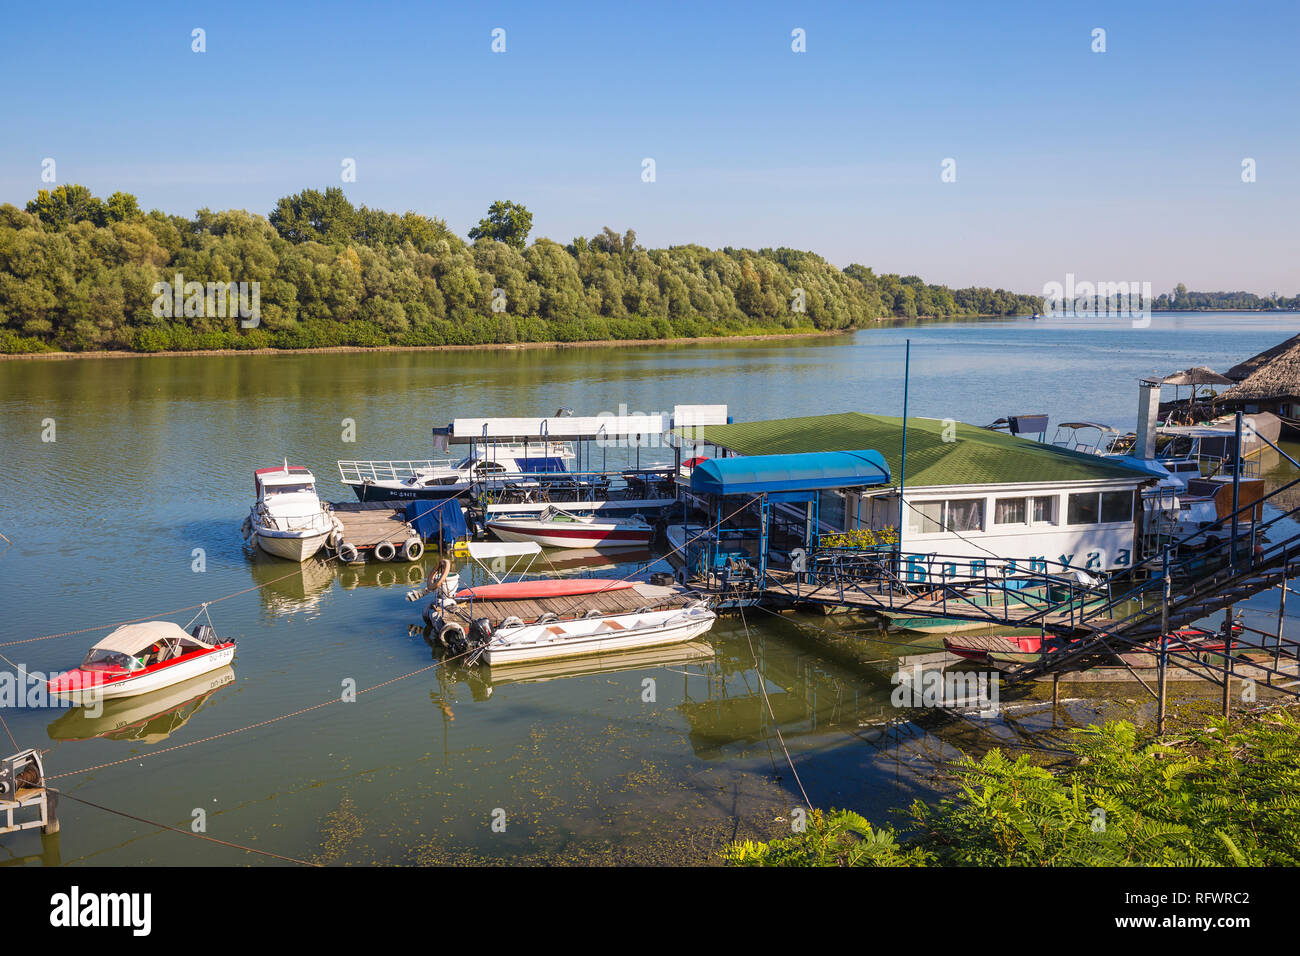 Floating restaurant and bars on the Danube River, Belgrade, Serbia, Europe Stock Photo